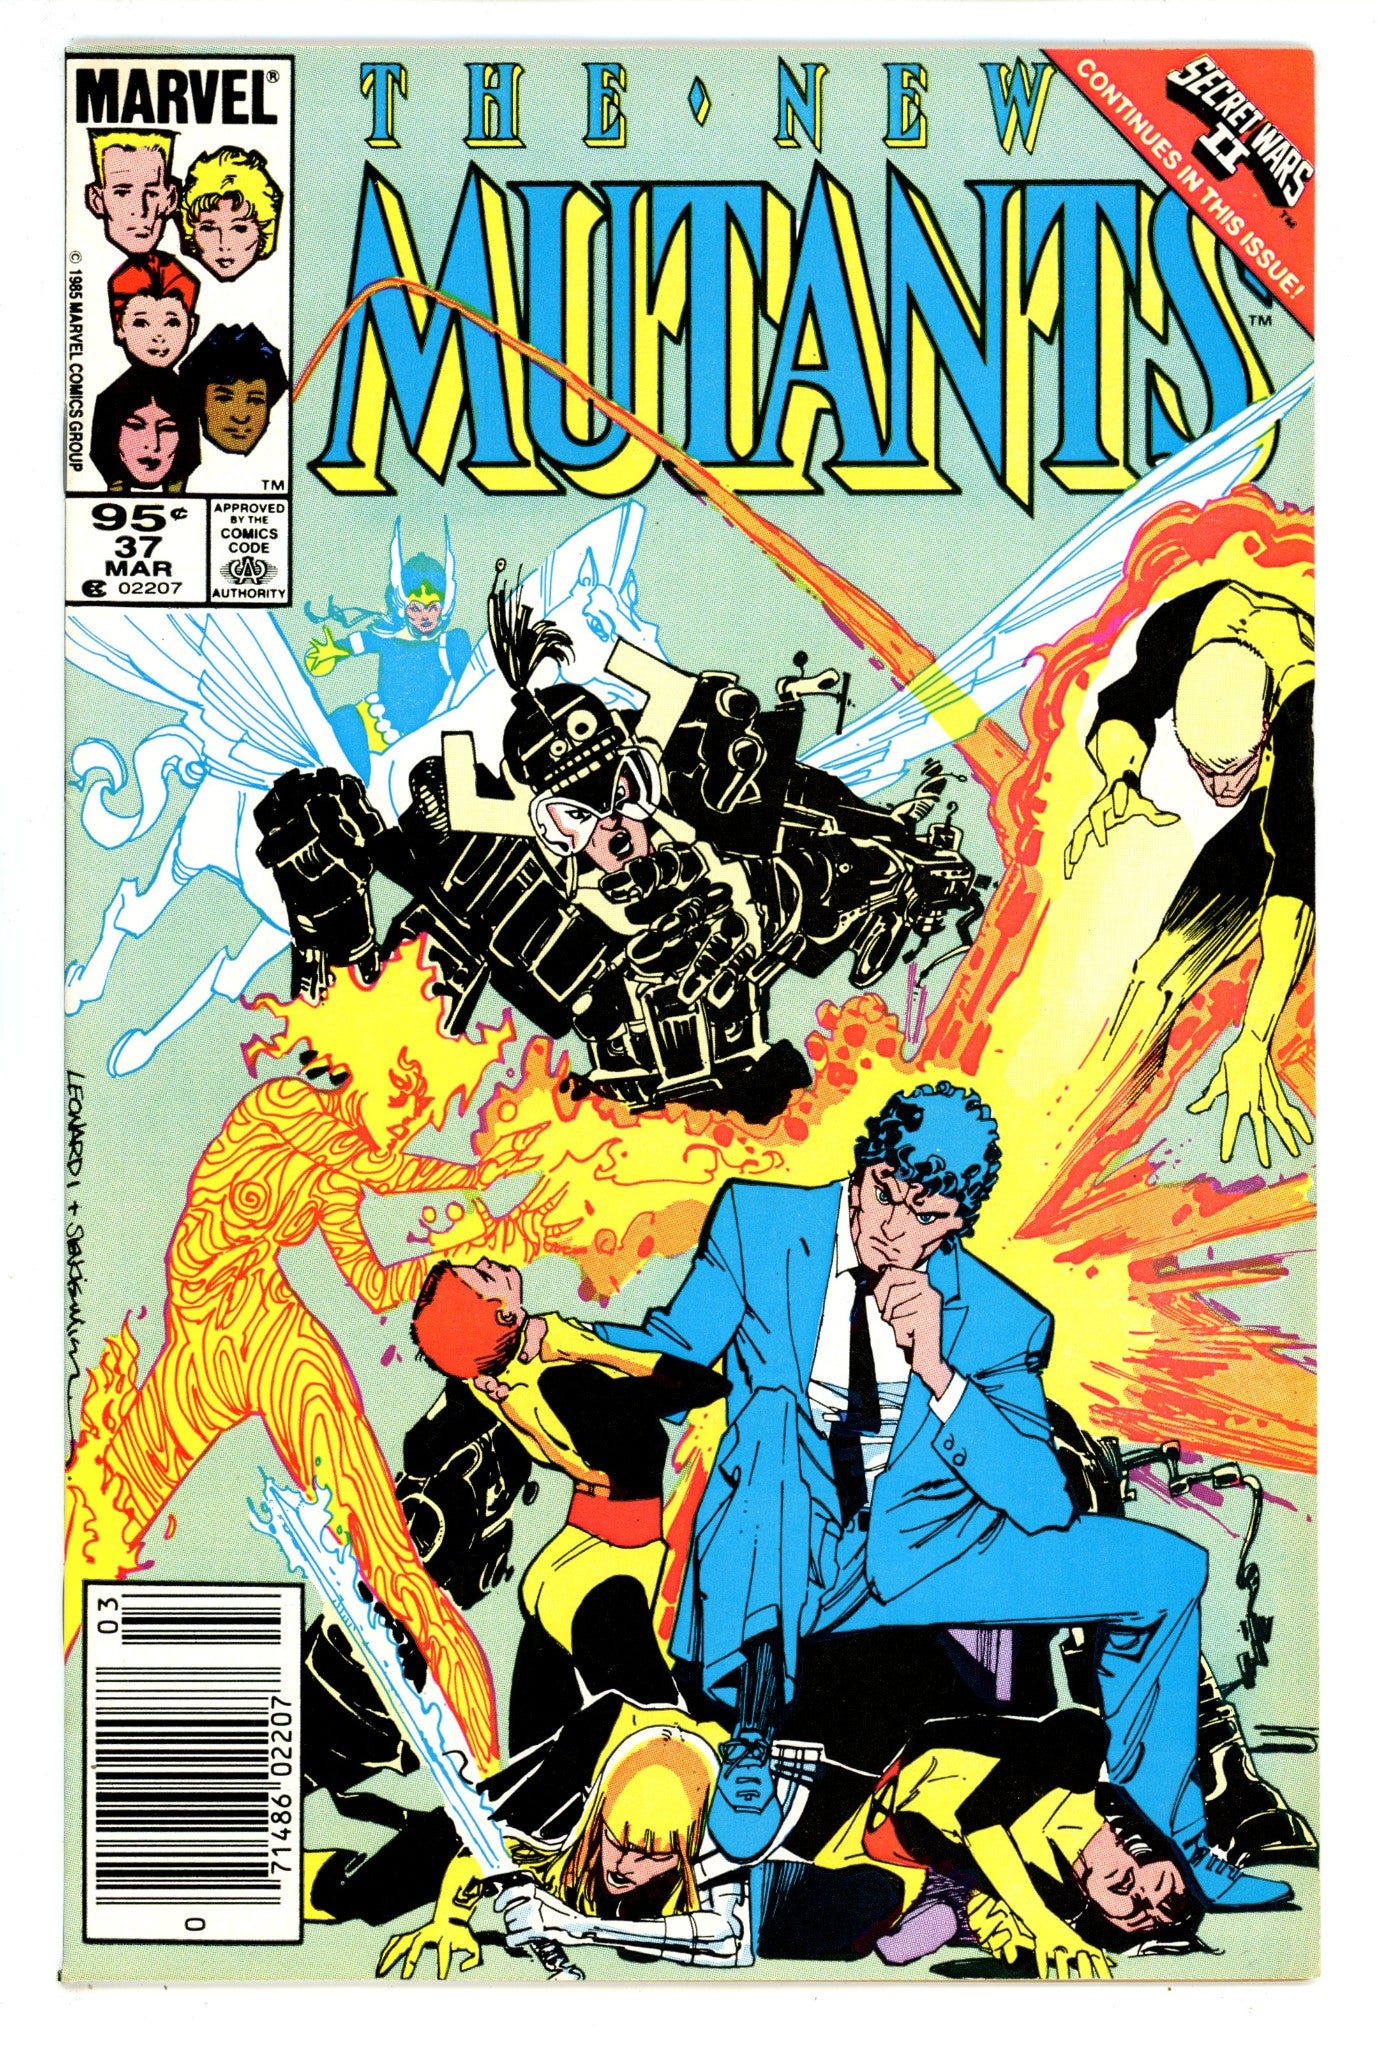 The New Mutants Vol 1 37 FN+ (6.5) (1986) Canadian Price Variant 